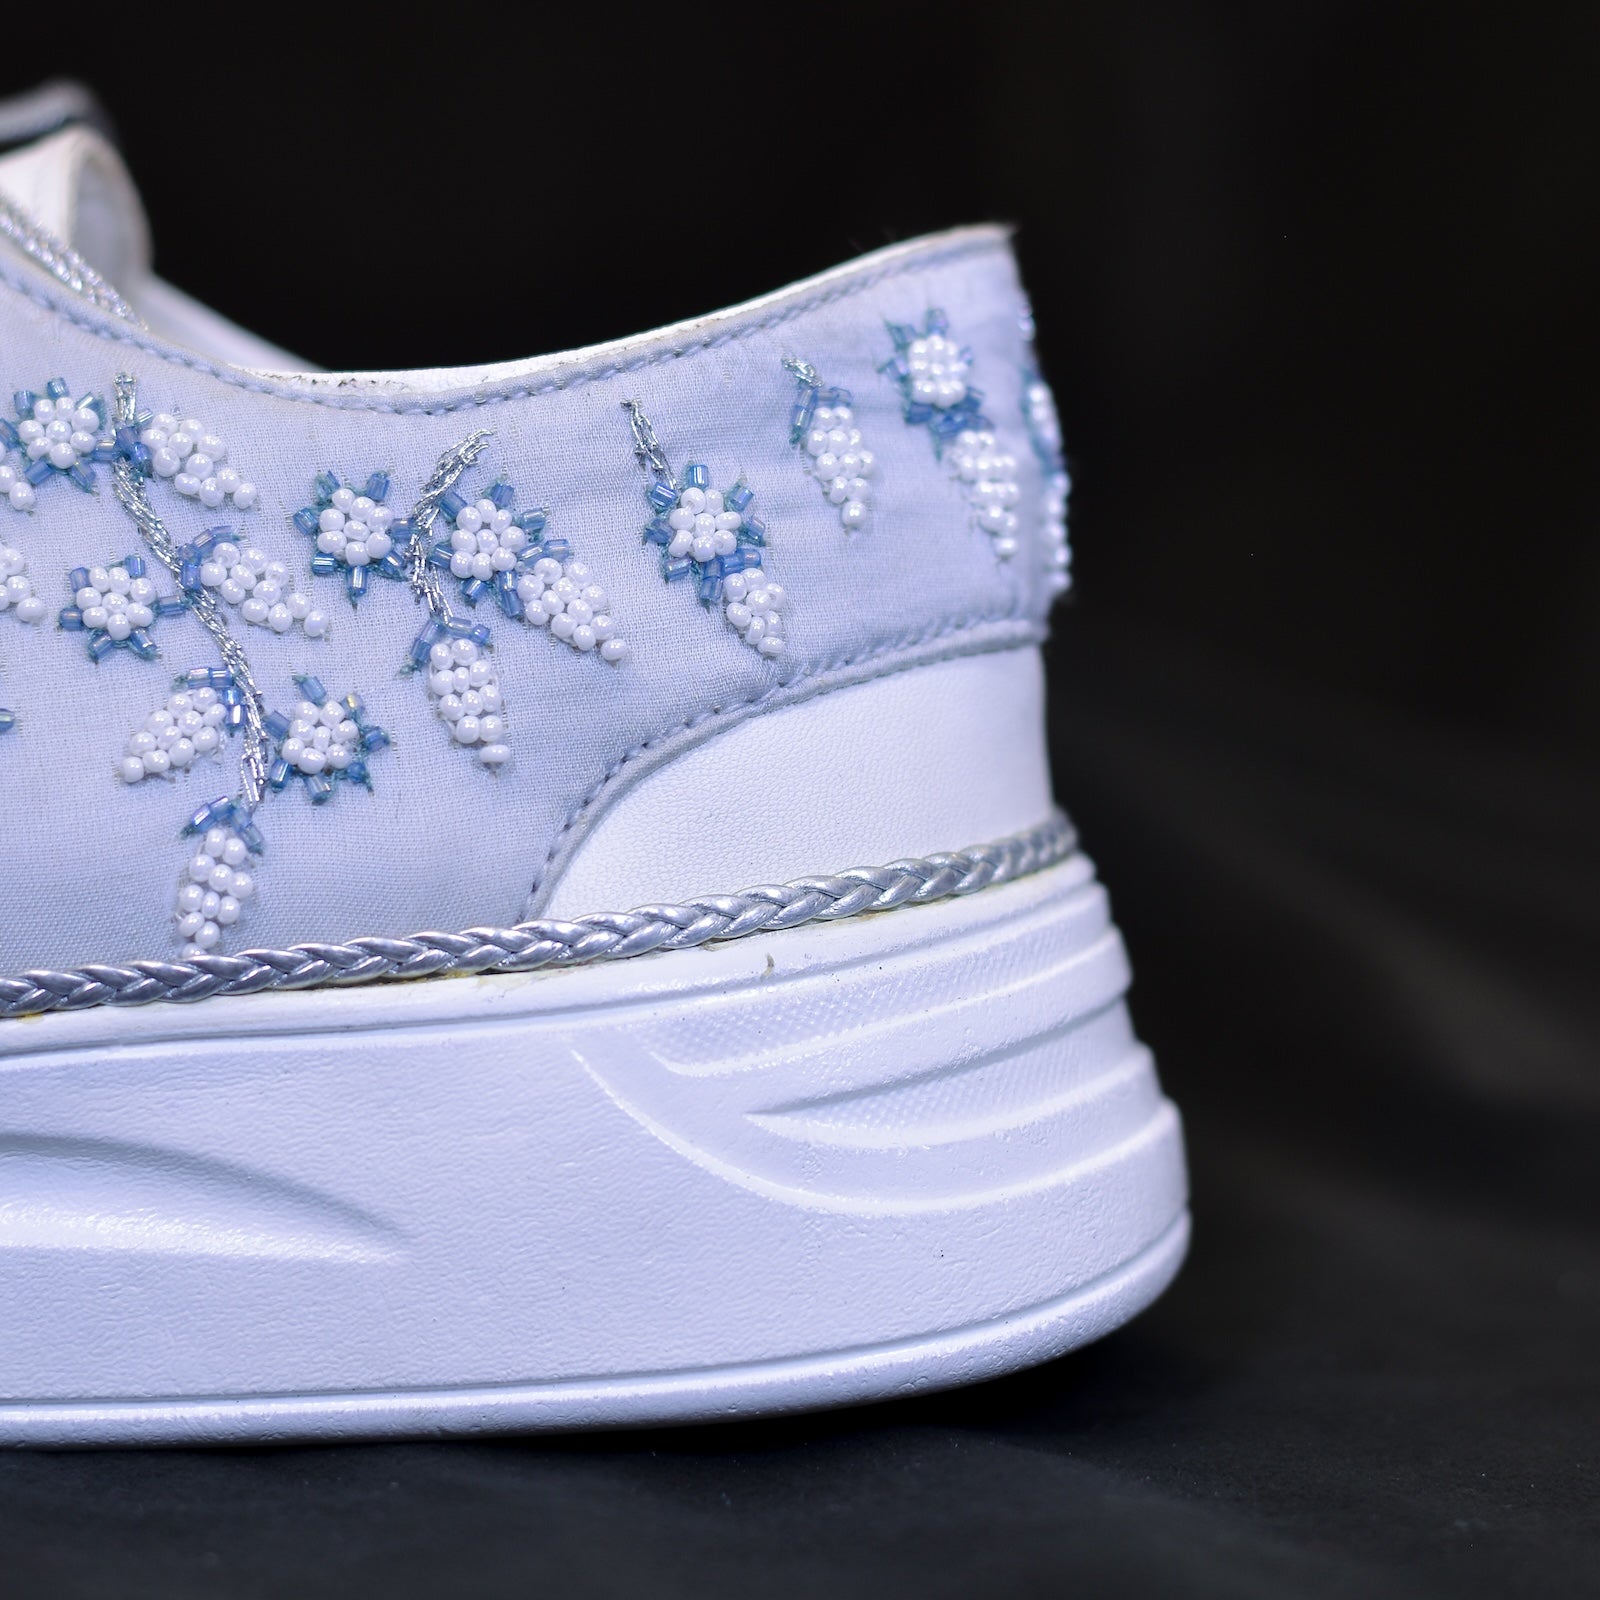 Embellished sneaker shoes for brides and bridesmaids